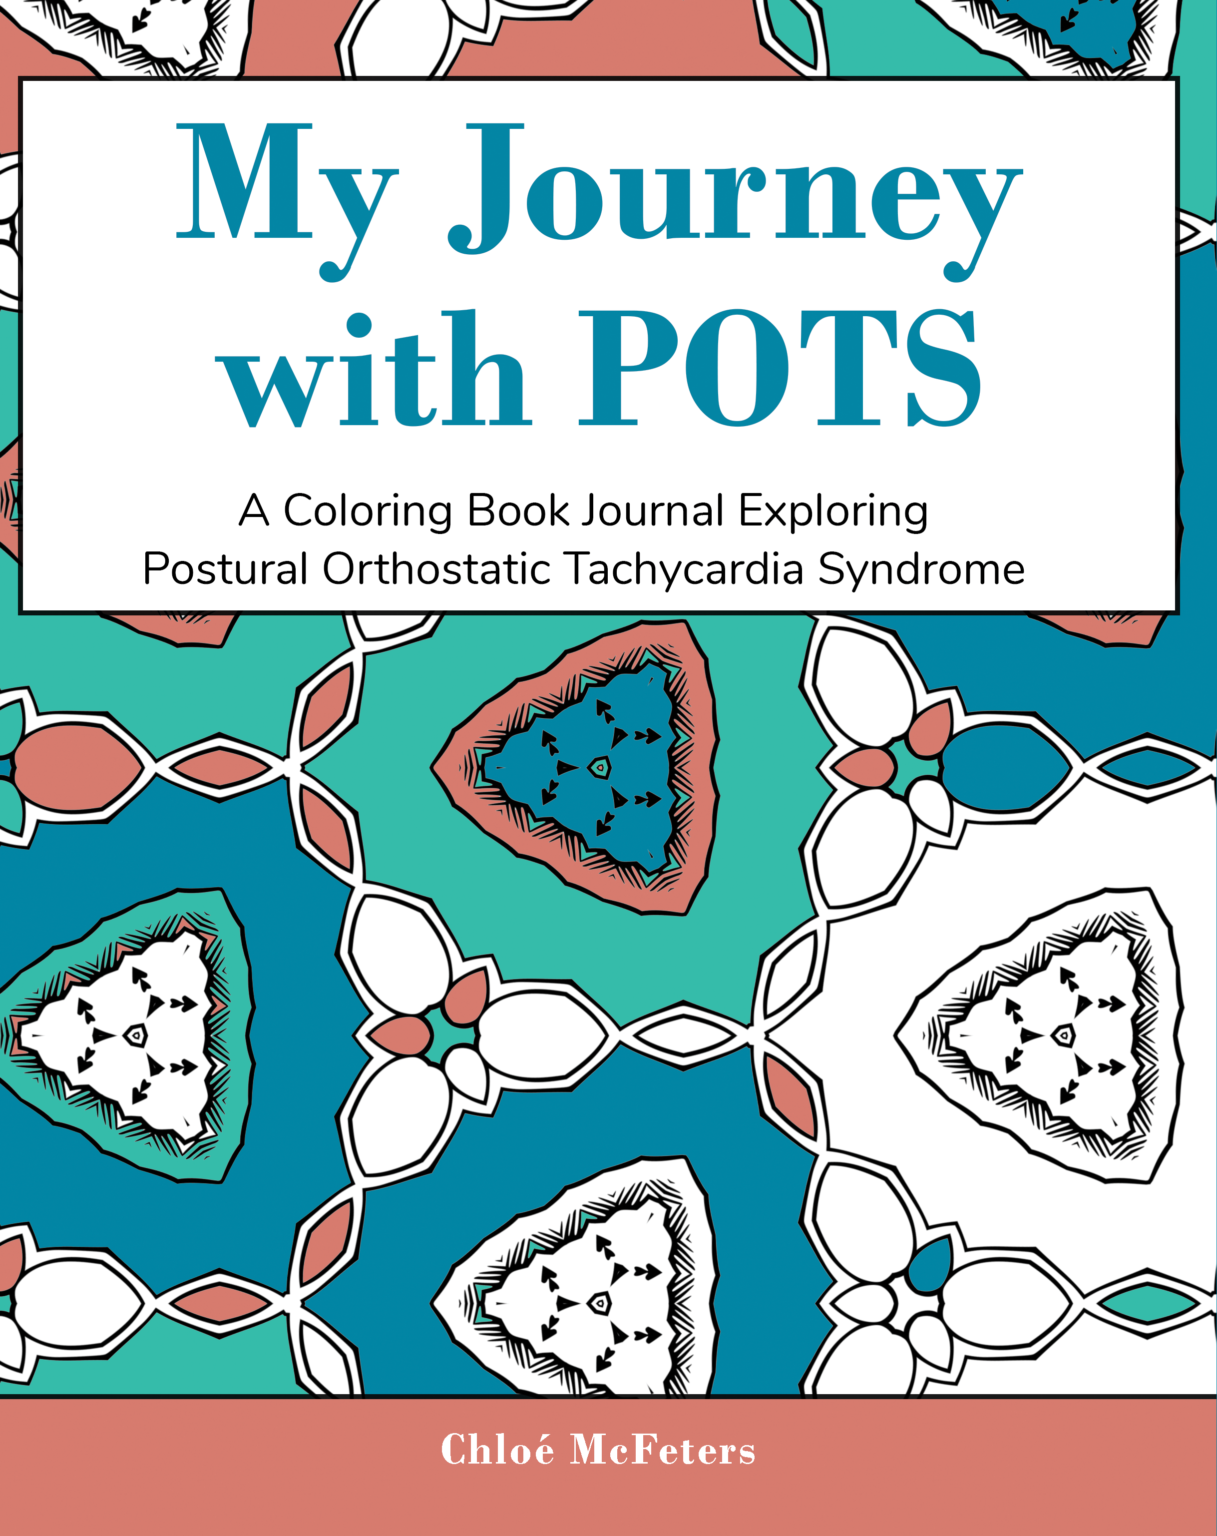 My Journey With Pots A Coloring Book Journal Exploring Postural Orthostatic Tachycardia